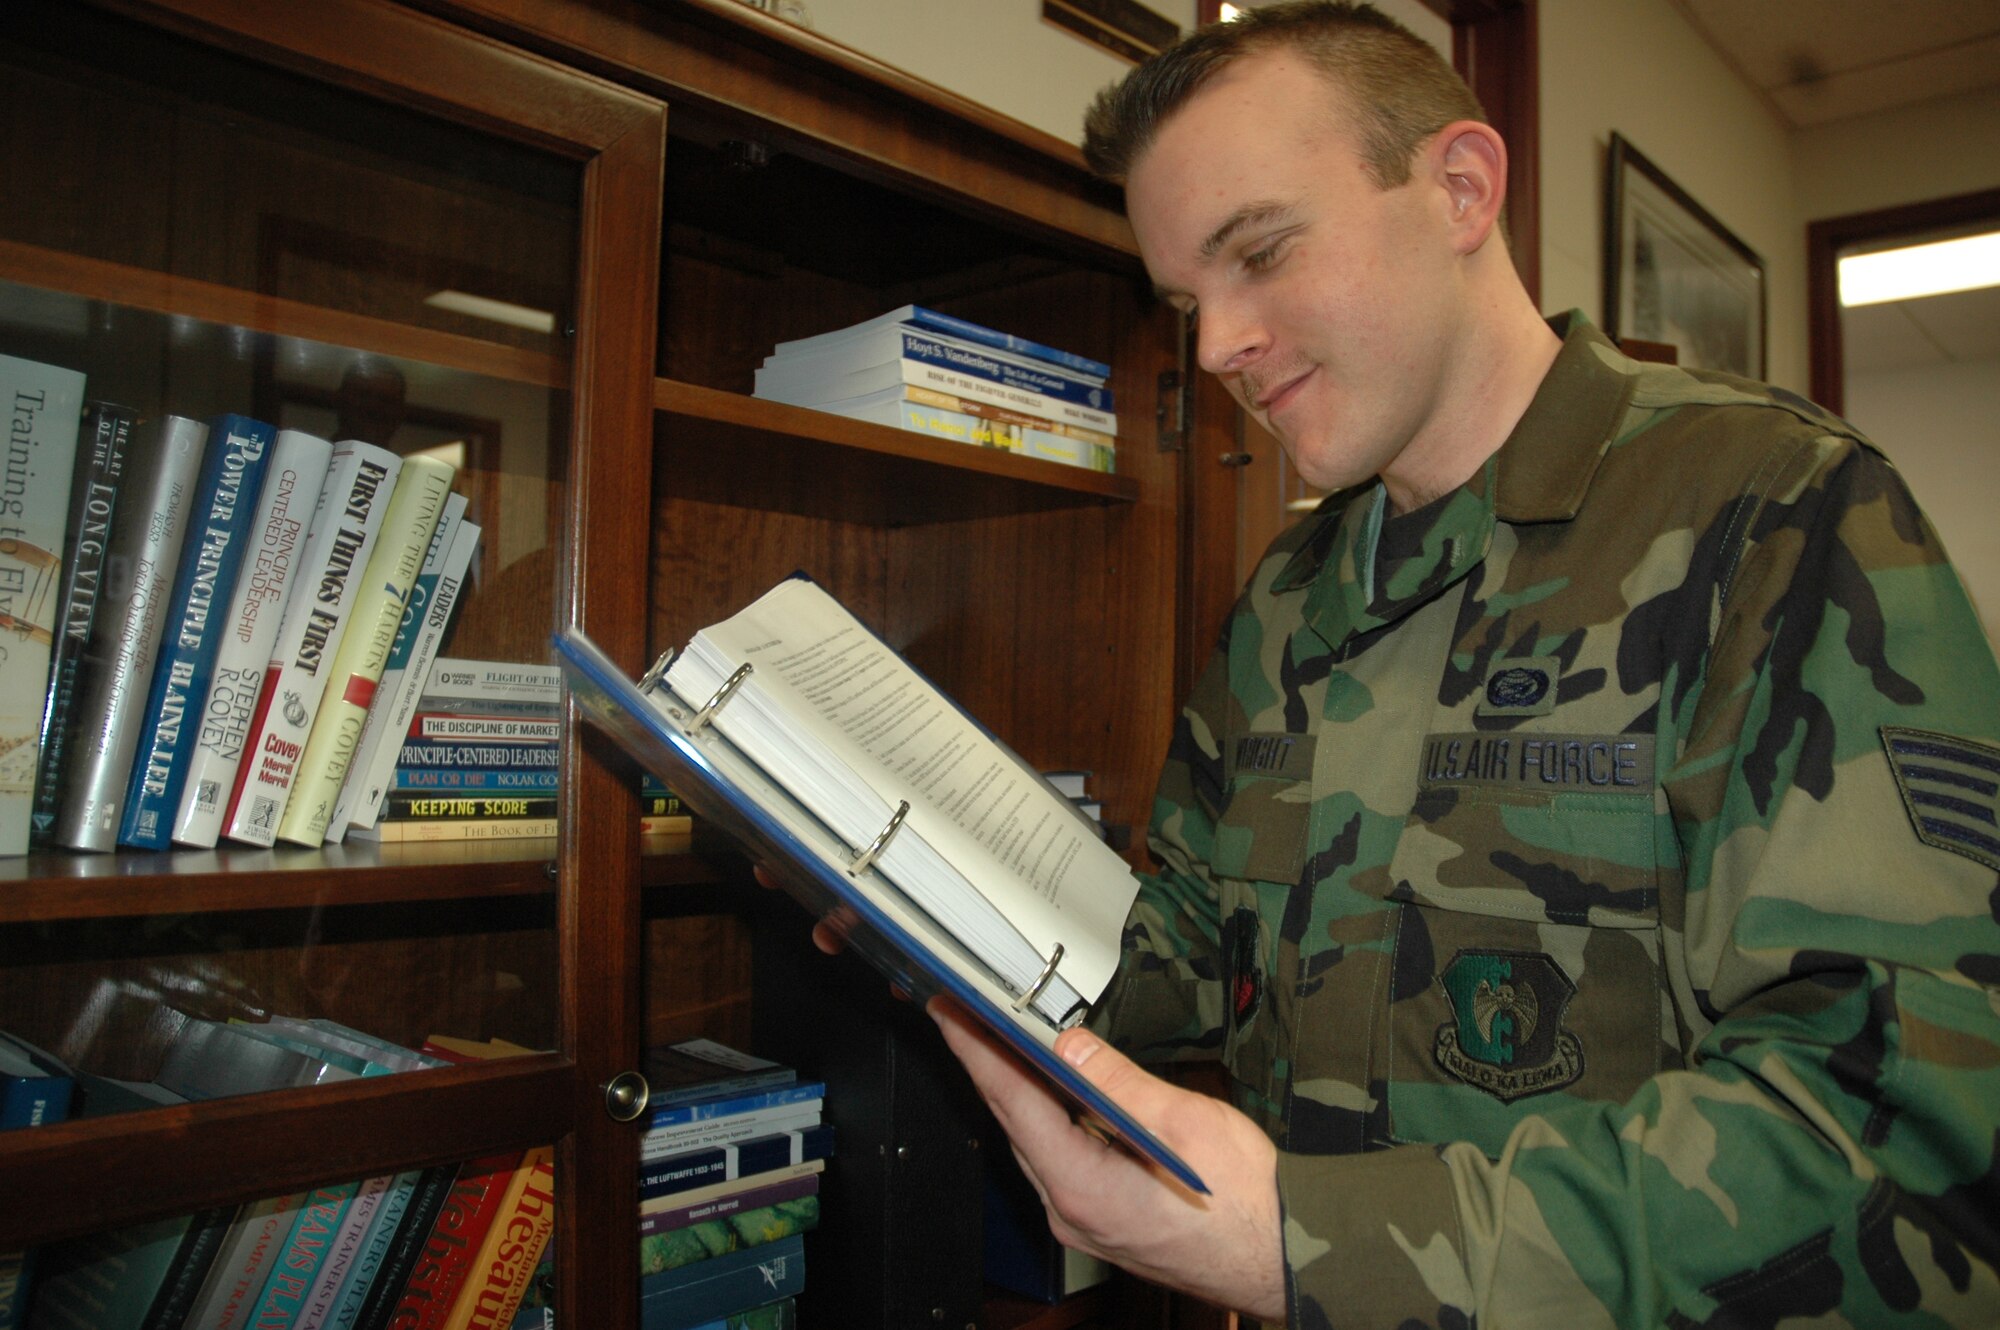 MINOT AIR FORCE BASE, N.D. -- Staff Sgt. Aaron Wright, 5th Bomb Wing Manpower and Organization office, reads an Air Force instruction manual Feb. 20. The manpower office recently won the 2006 Air Combat Command Best Small Manpower and Organization Award for Professional Excellence. (U.S. Air Force photo by Senior Airman Danny Monahan)